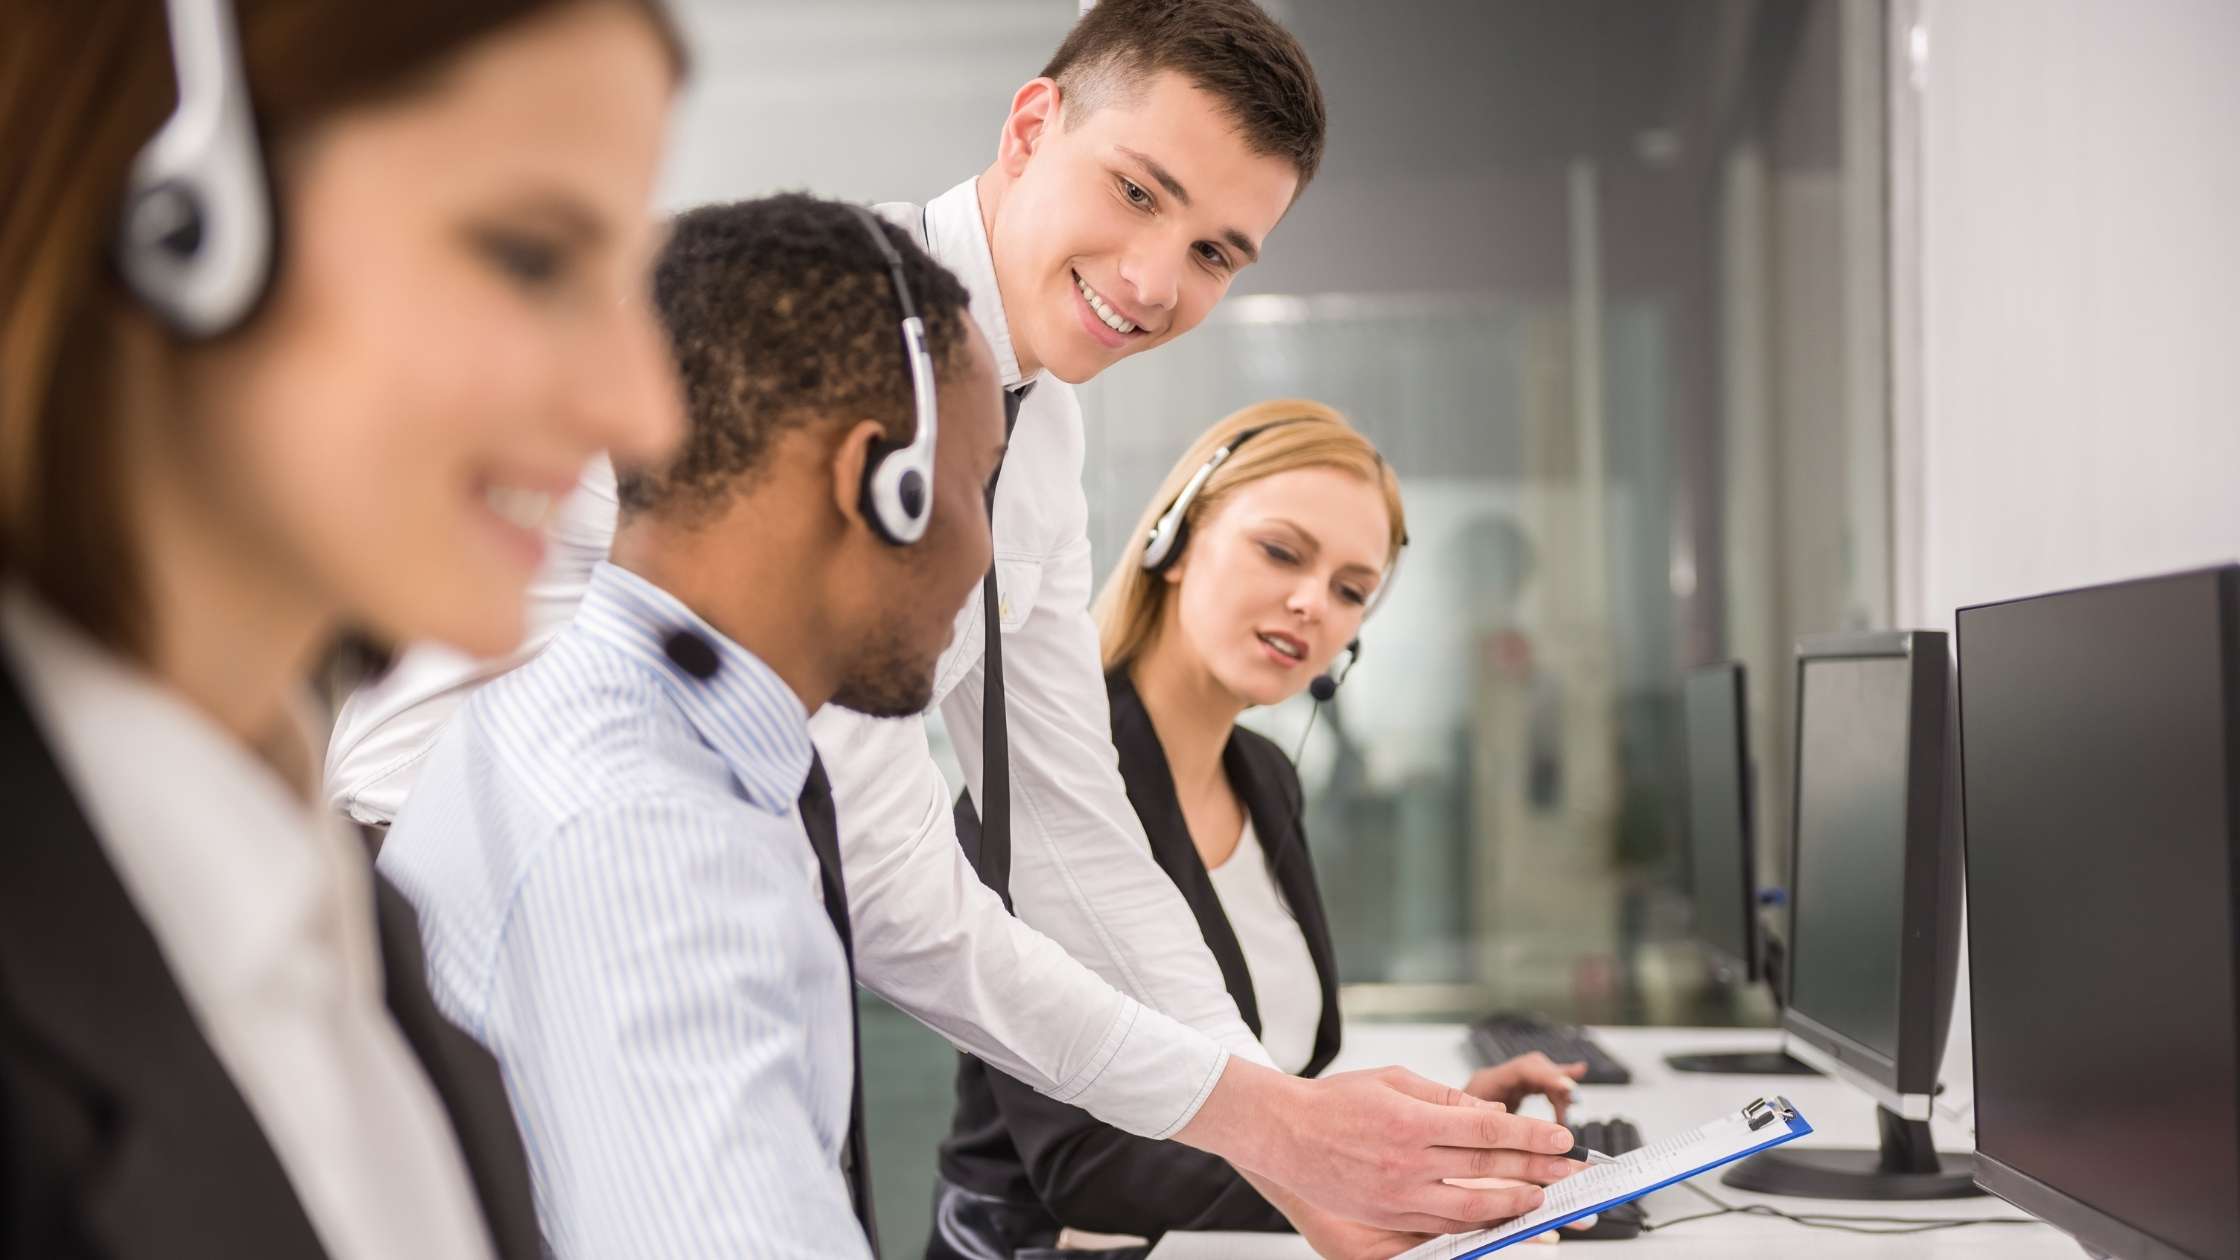 Top 5 call center monitoring software for 2023